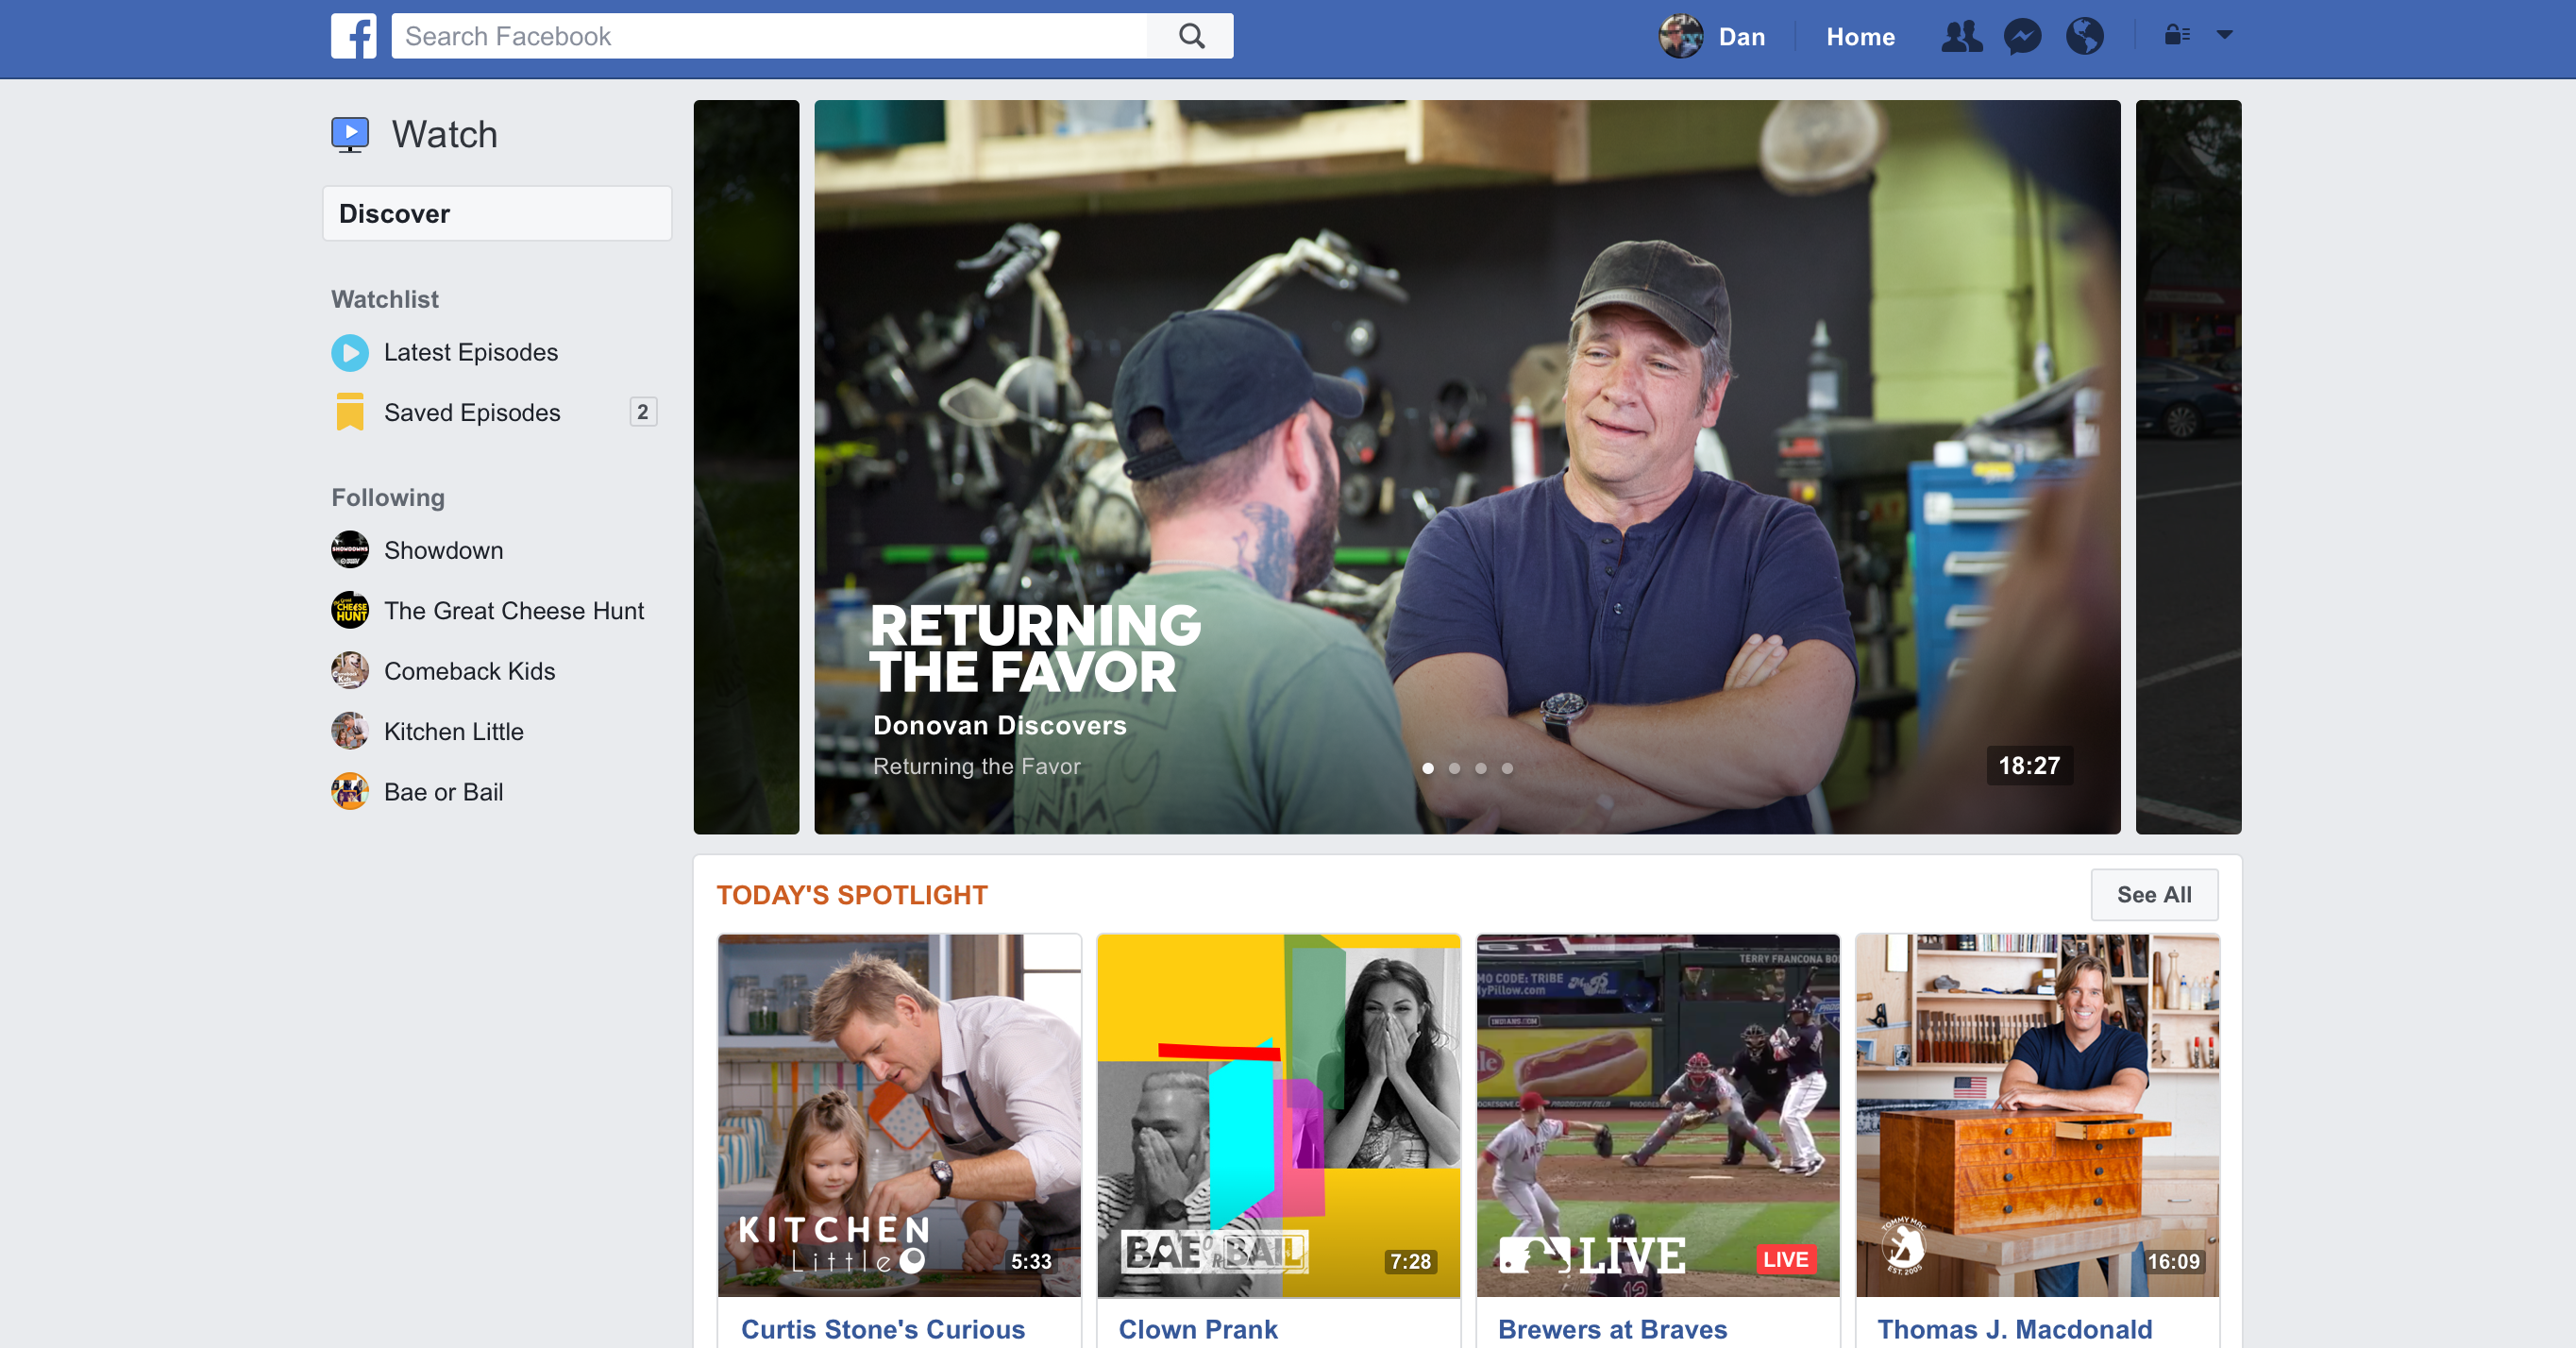 Facebook is creating a news section in Watch to feature breaking news